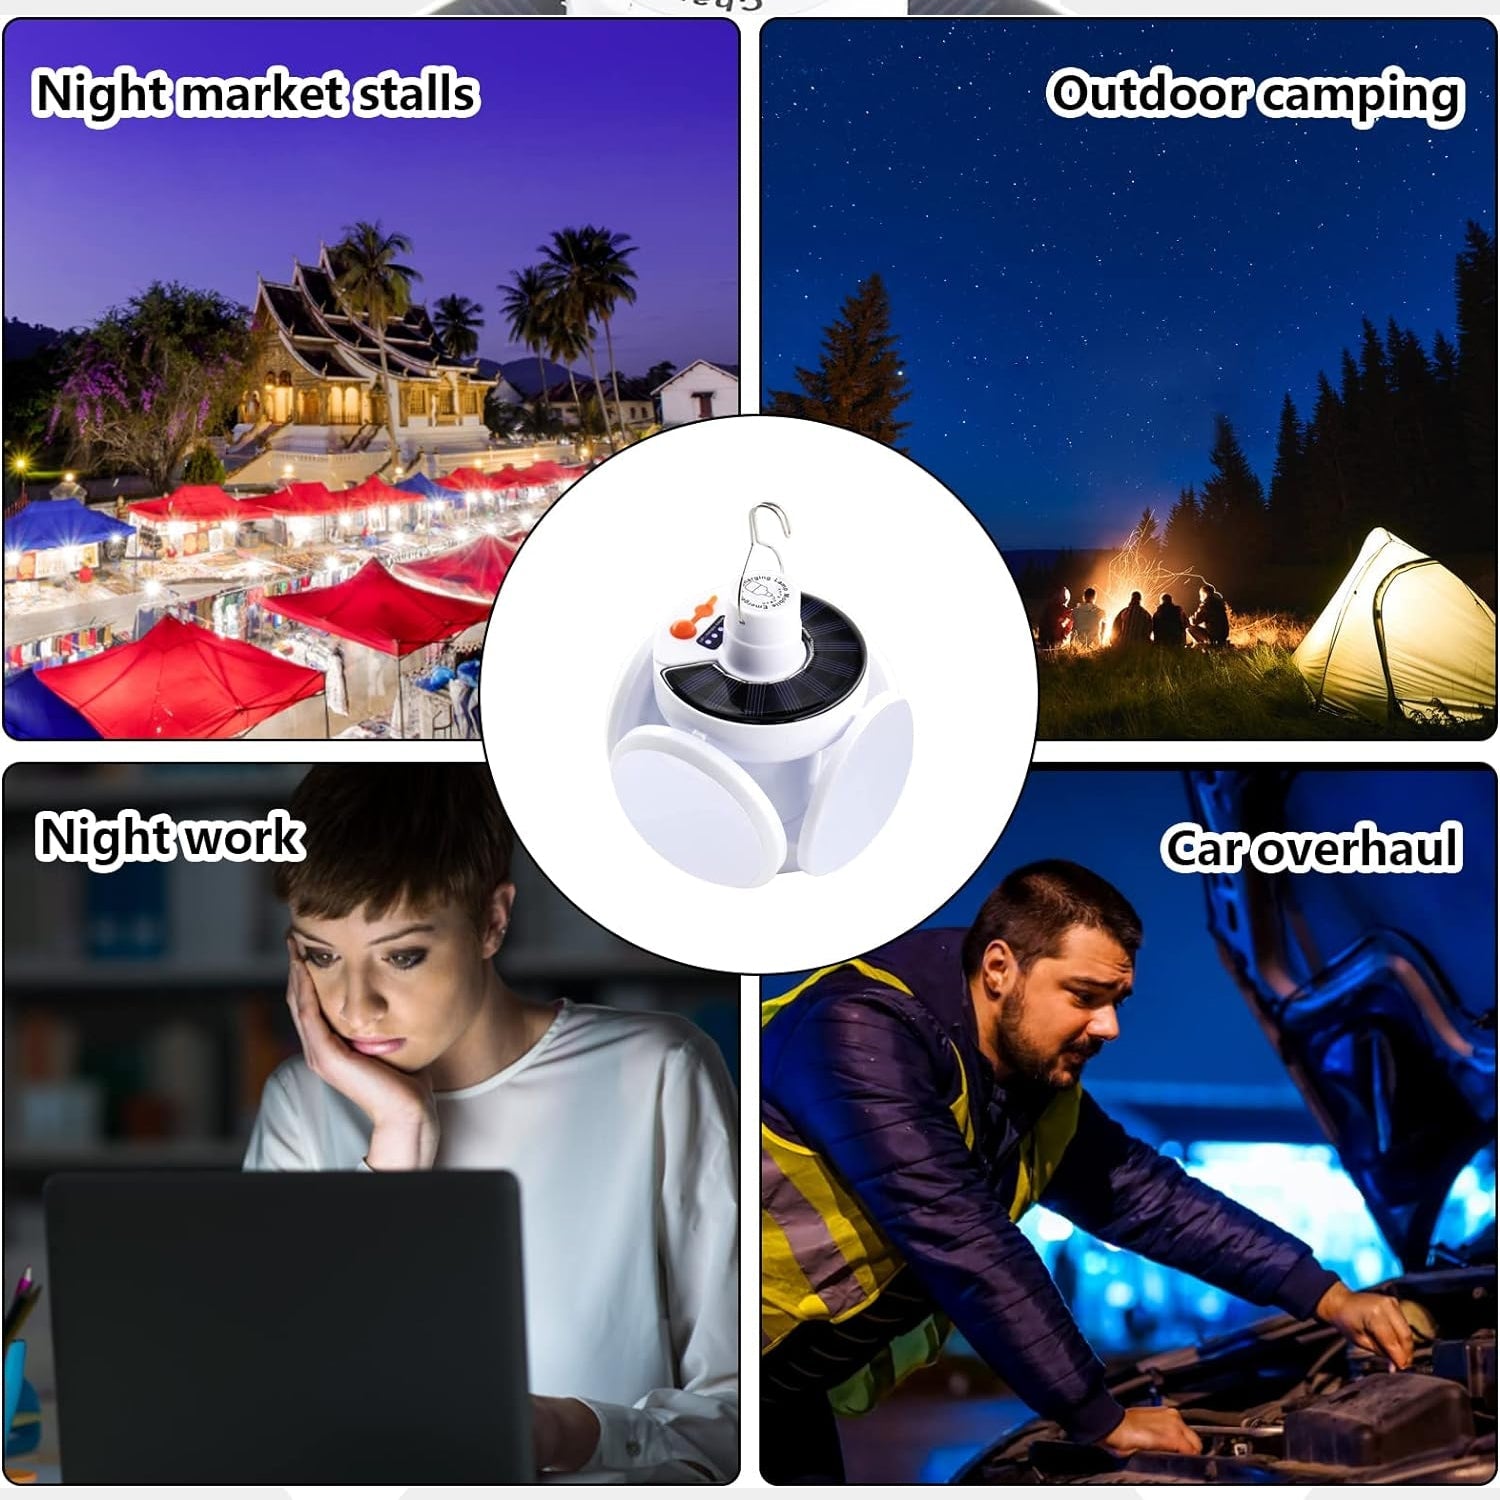 12590 Solar Multi-Functional Emergency LED Light Bulb with USB Charging, LED camping lamp, camping lamp, USB rechargeable, 5 brightness light modes, foldable camping light, SOS IP65 waterproof camping light, blackout emergency equipment, camping gadgets